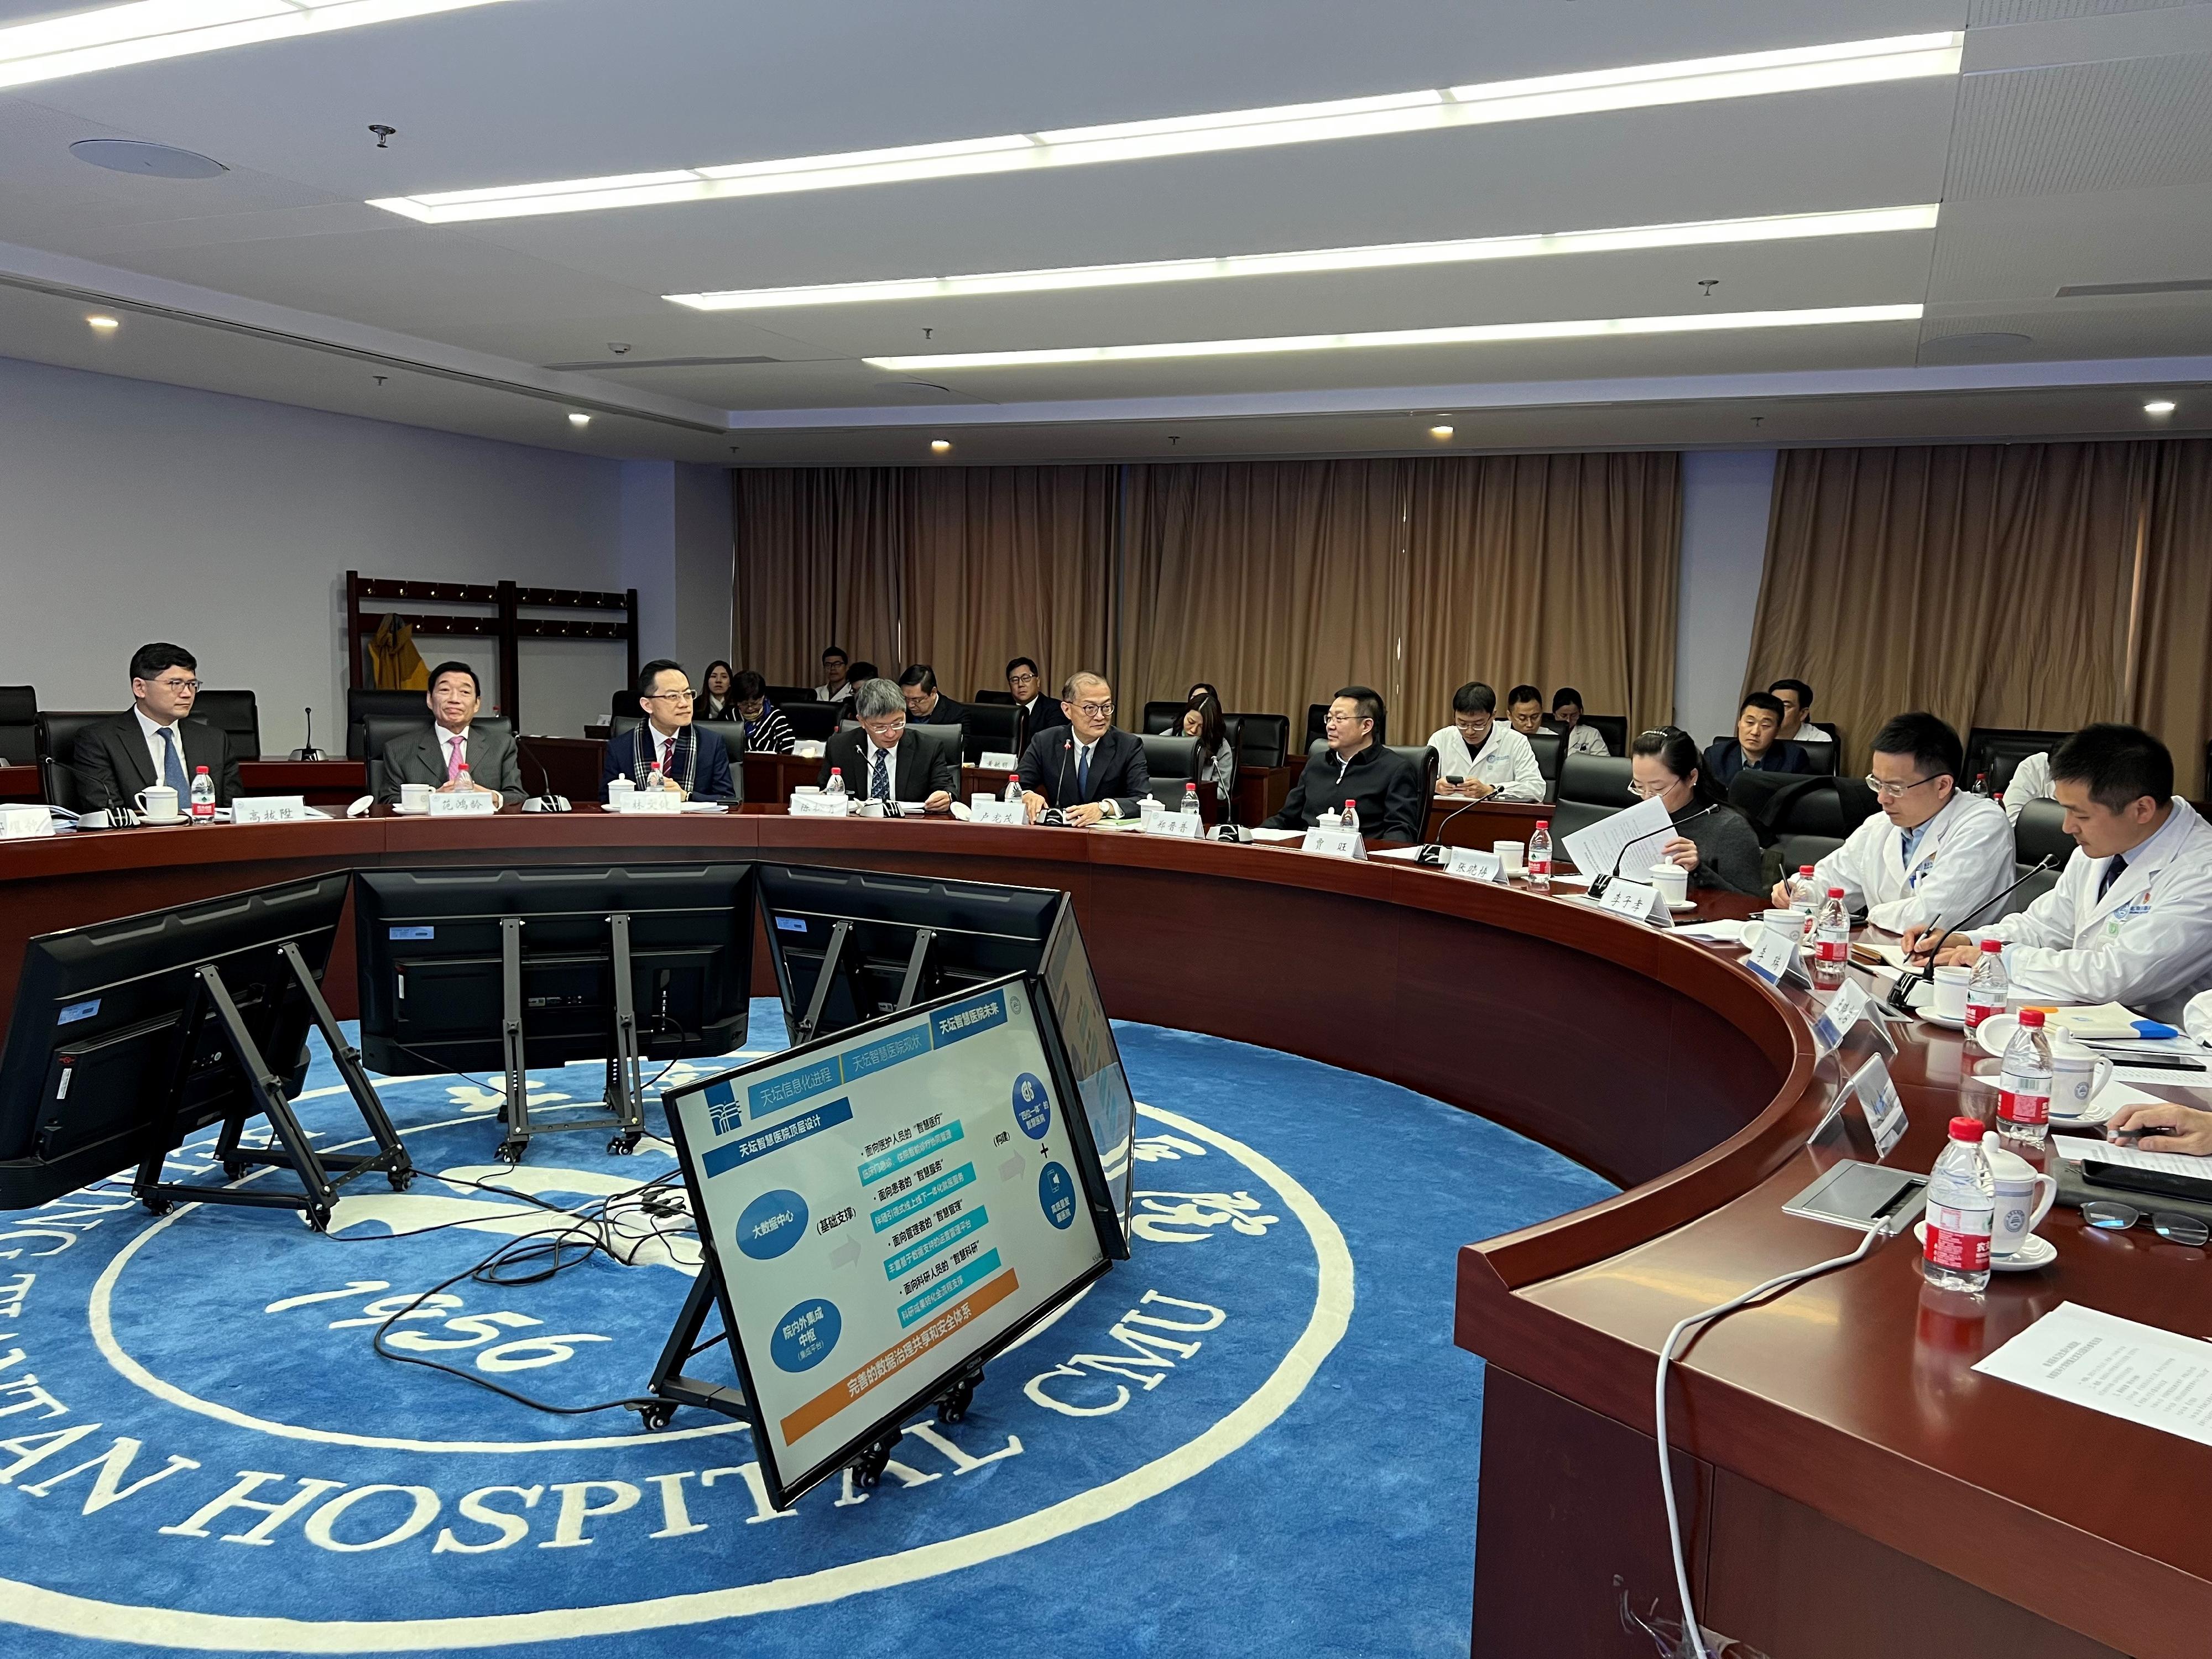 The Secretary for Health, Professor Lo Chung-mau; started a three-day visit to Beijing today (November 6). He visited Beijing Tiantan Hospital affiliated to Capital Medical University this morning to learn about the hospital’s latest moves in fostering smart hospital development. Photo shows Professor Lo (front row, centre) exchanging views with staff members of the hospital at the Beijing Tiantan Hospital Intelligent Management Center. Next to him are the Permanent Secretary for Health, Mr Thomas Chan (front row, fourth left); the Director of Health, Dr Ronald Lam (front row, third left); the Chairman of the Hospital Authority (HA), Mr Henry Fan (front row, second left); and the Chief Executive of the HA, Dr Tony Ko (front row, first left).